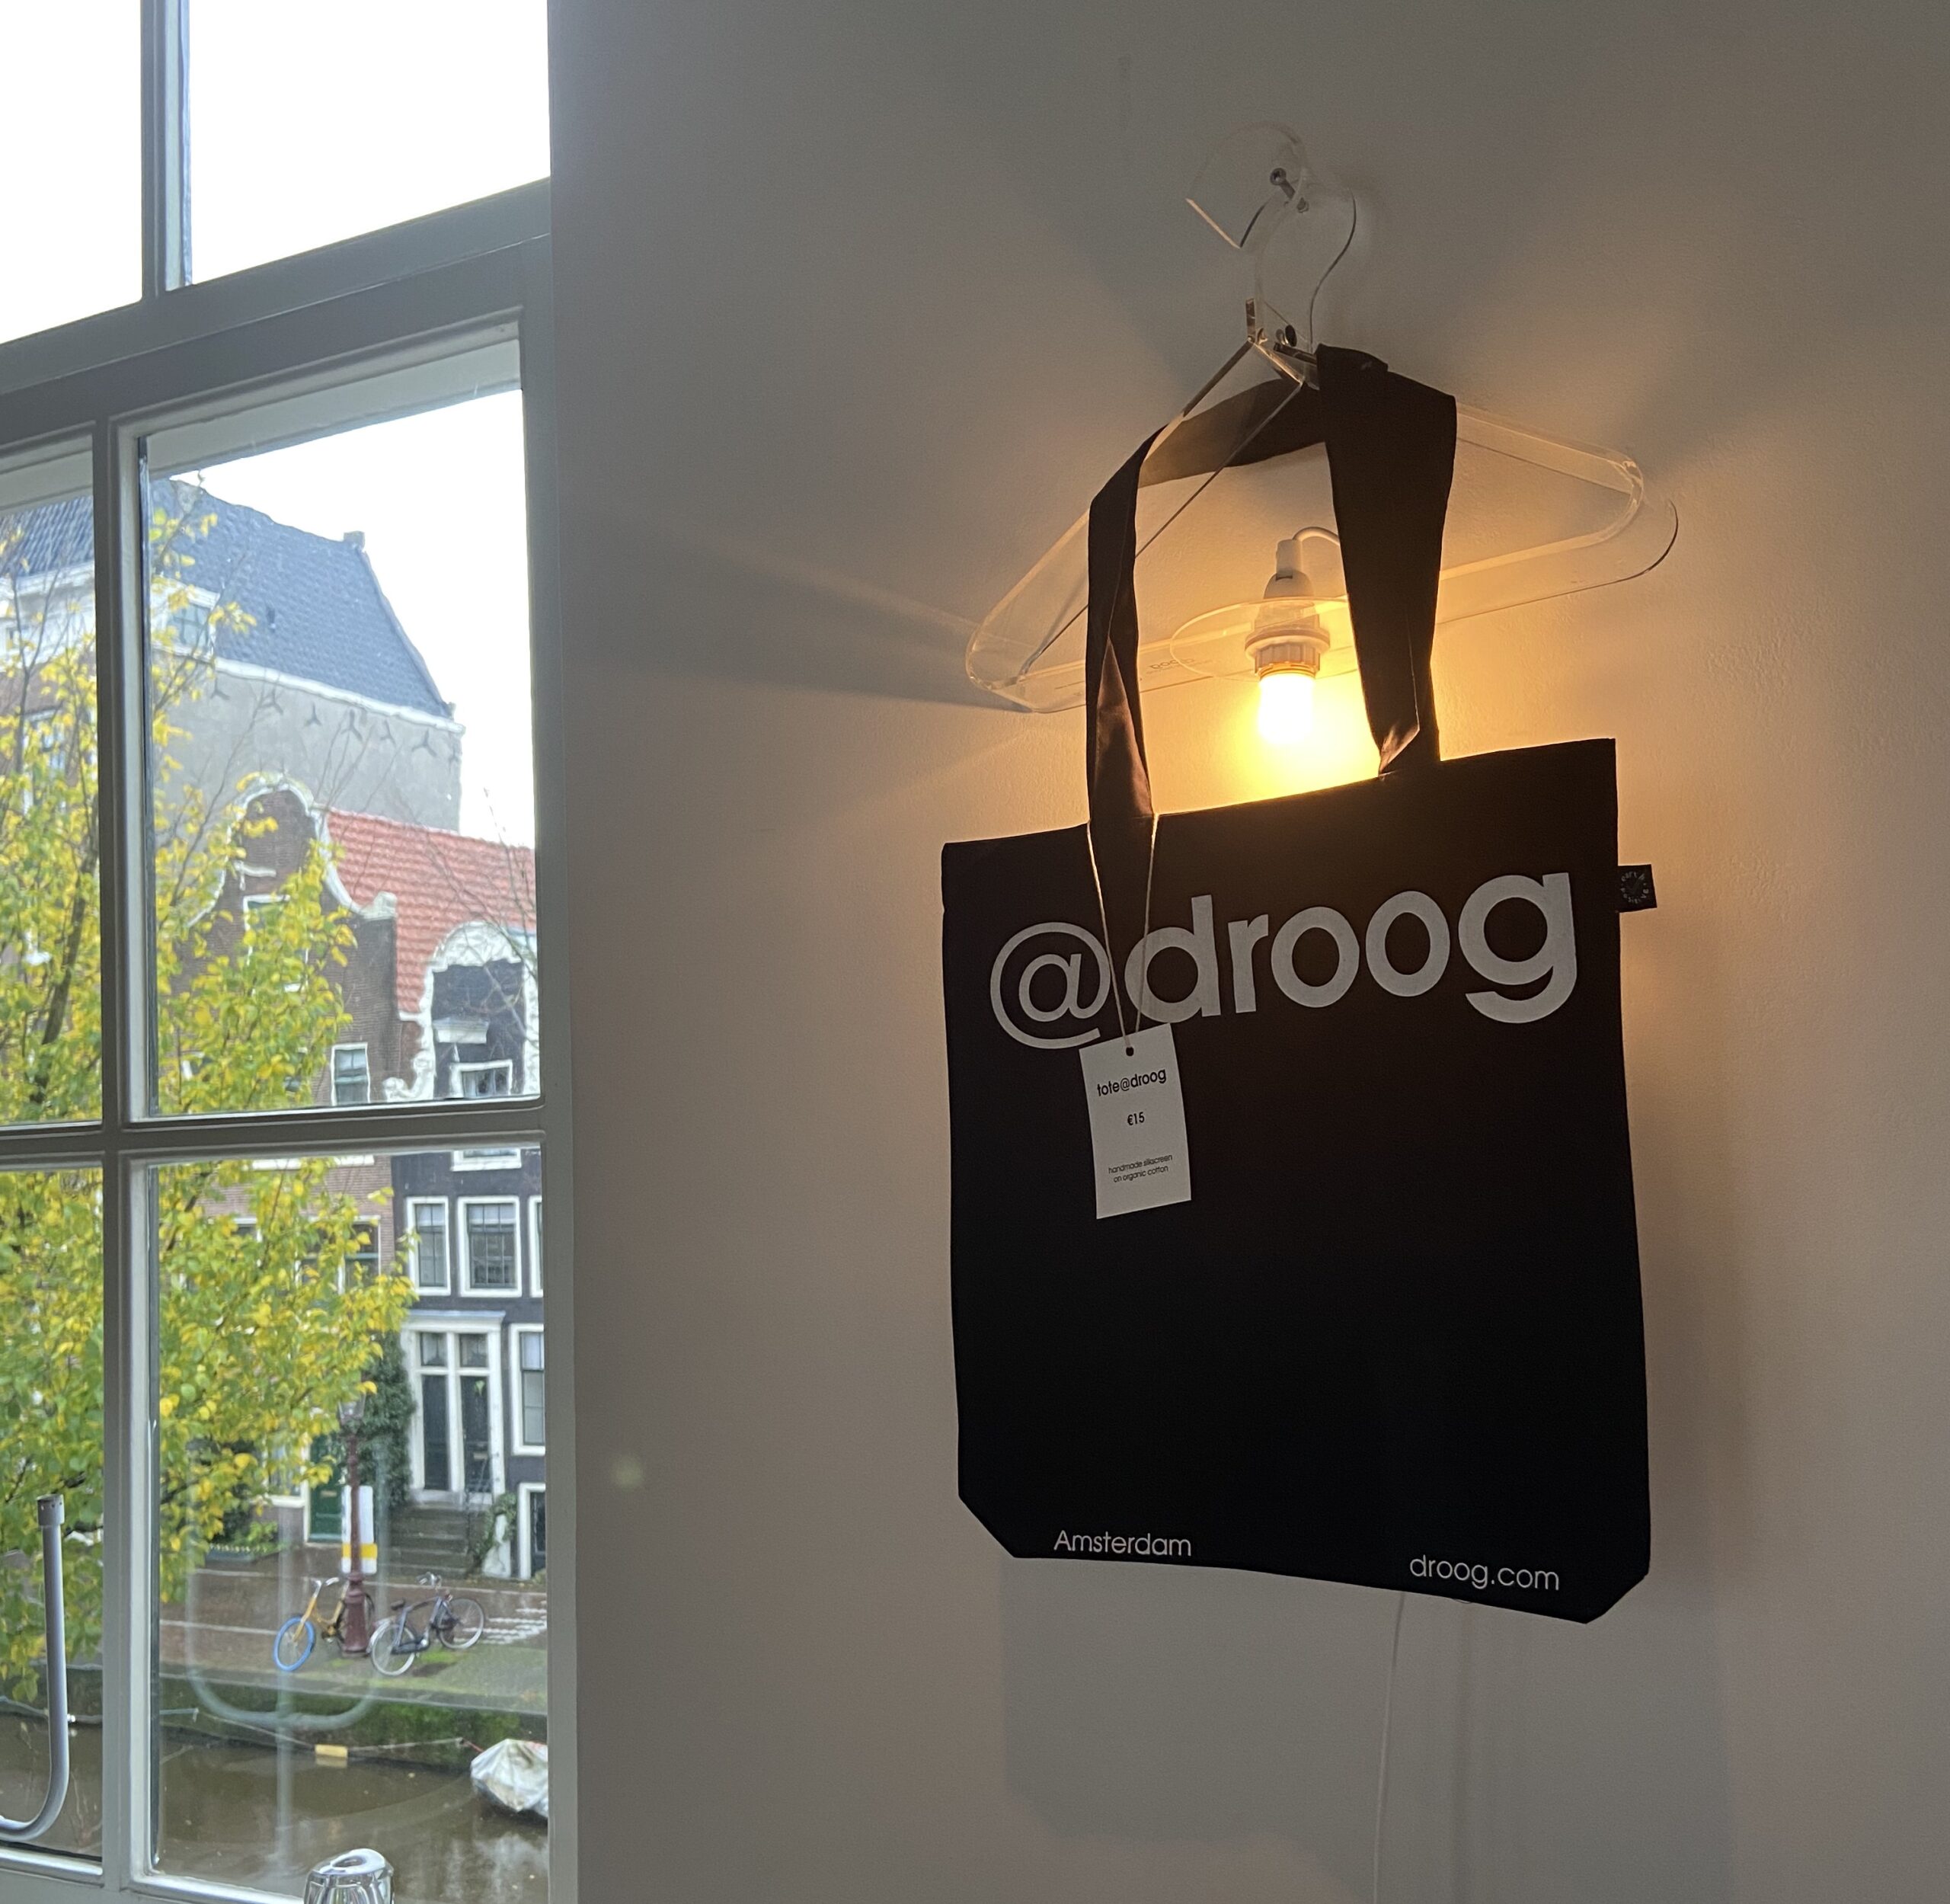 get your limited edition tote@droog